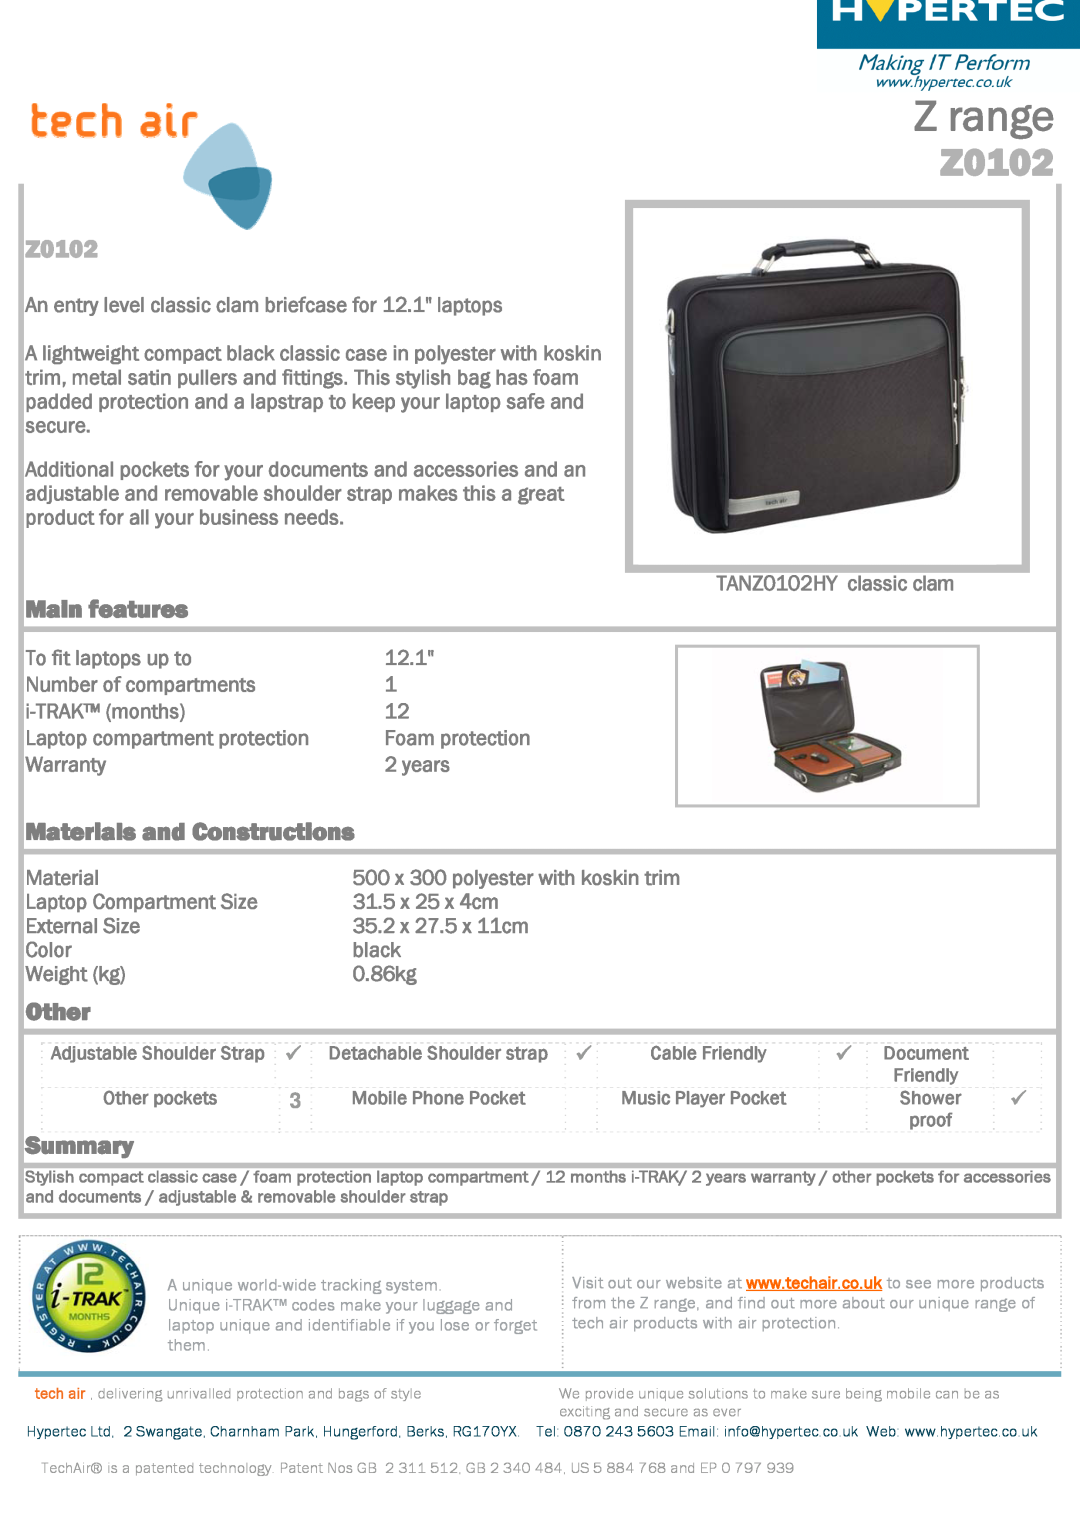 Hypertec Z0102 warranty Z range, Main features, Materials and Constructions, Other, Summary 